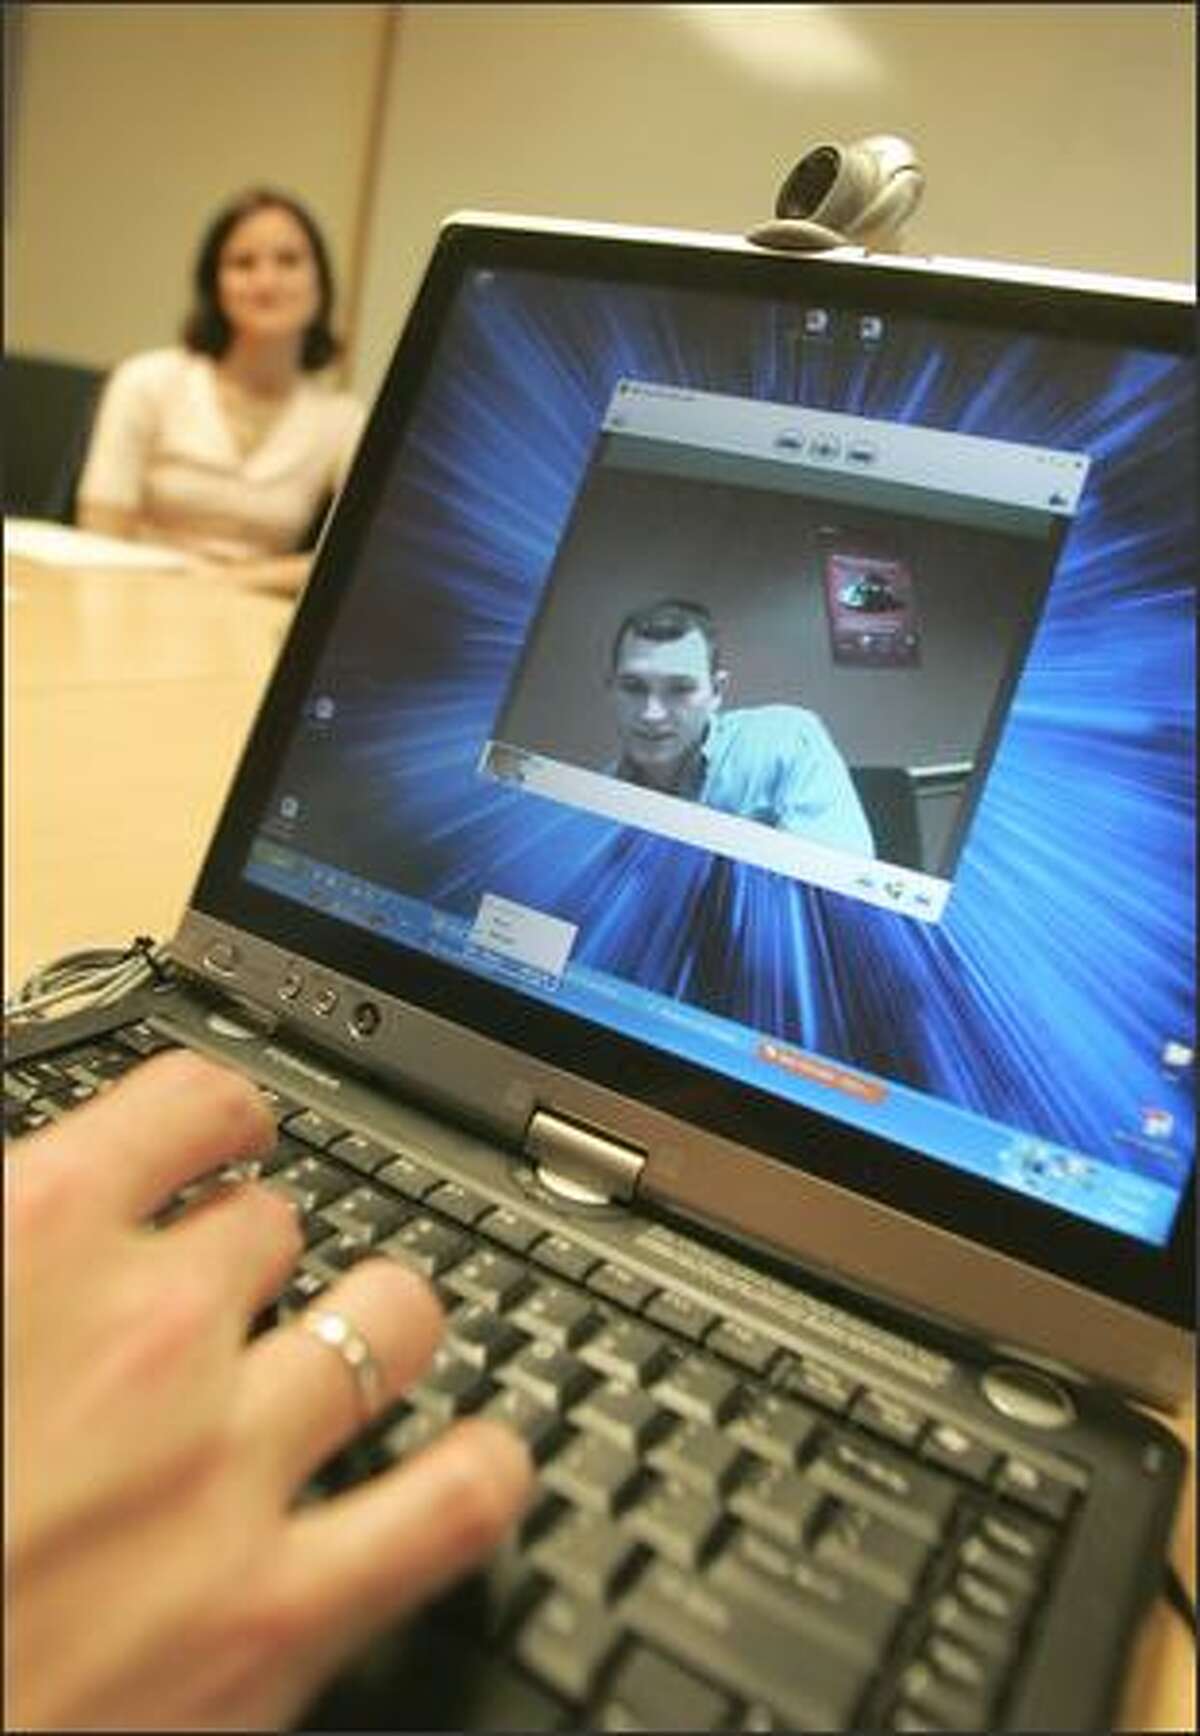 Michael Cowan, product marketing manager for Microsoft Hardware, demonstrates a Webcam the company is creating.